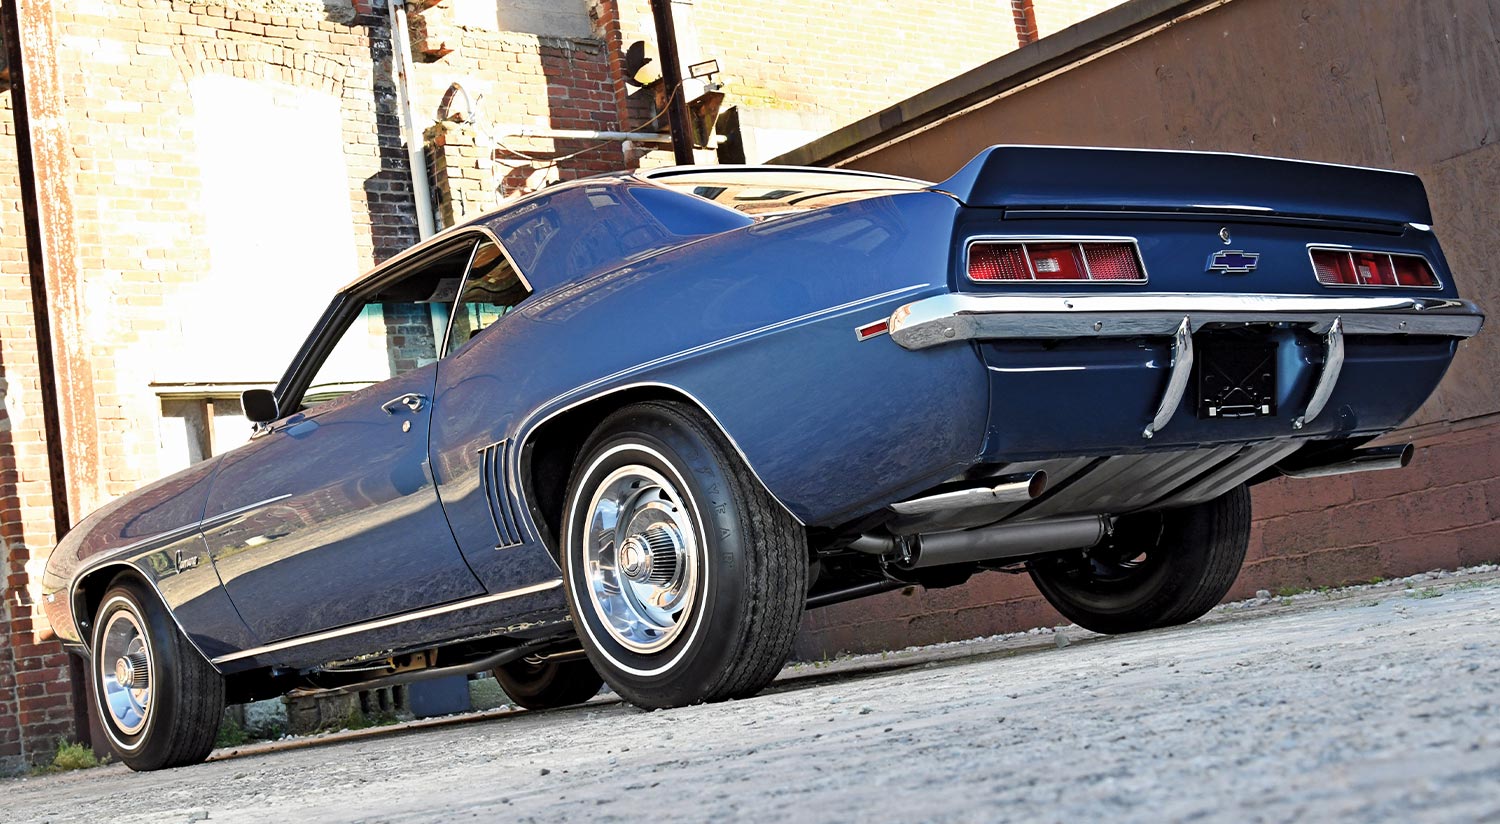 low angled rear view of the dusk blue ’69 COPO Camaro